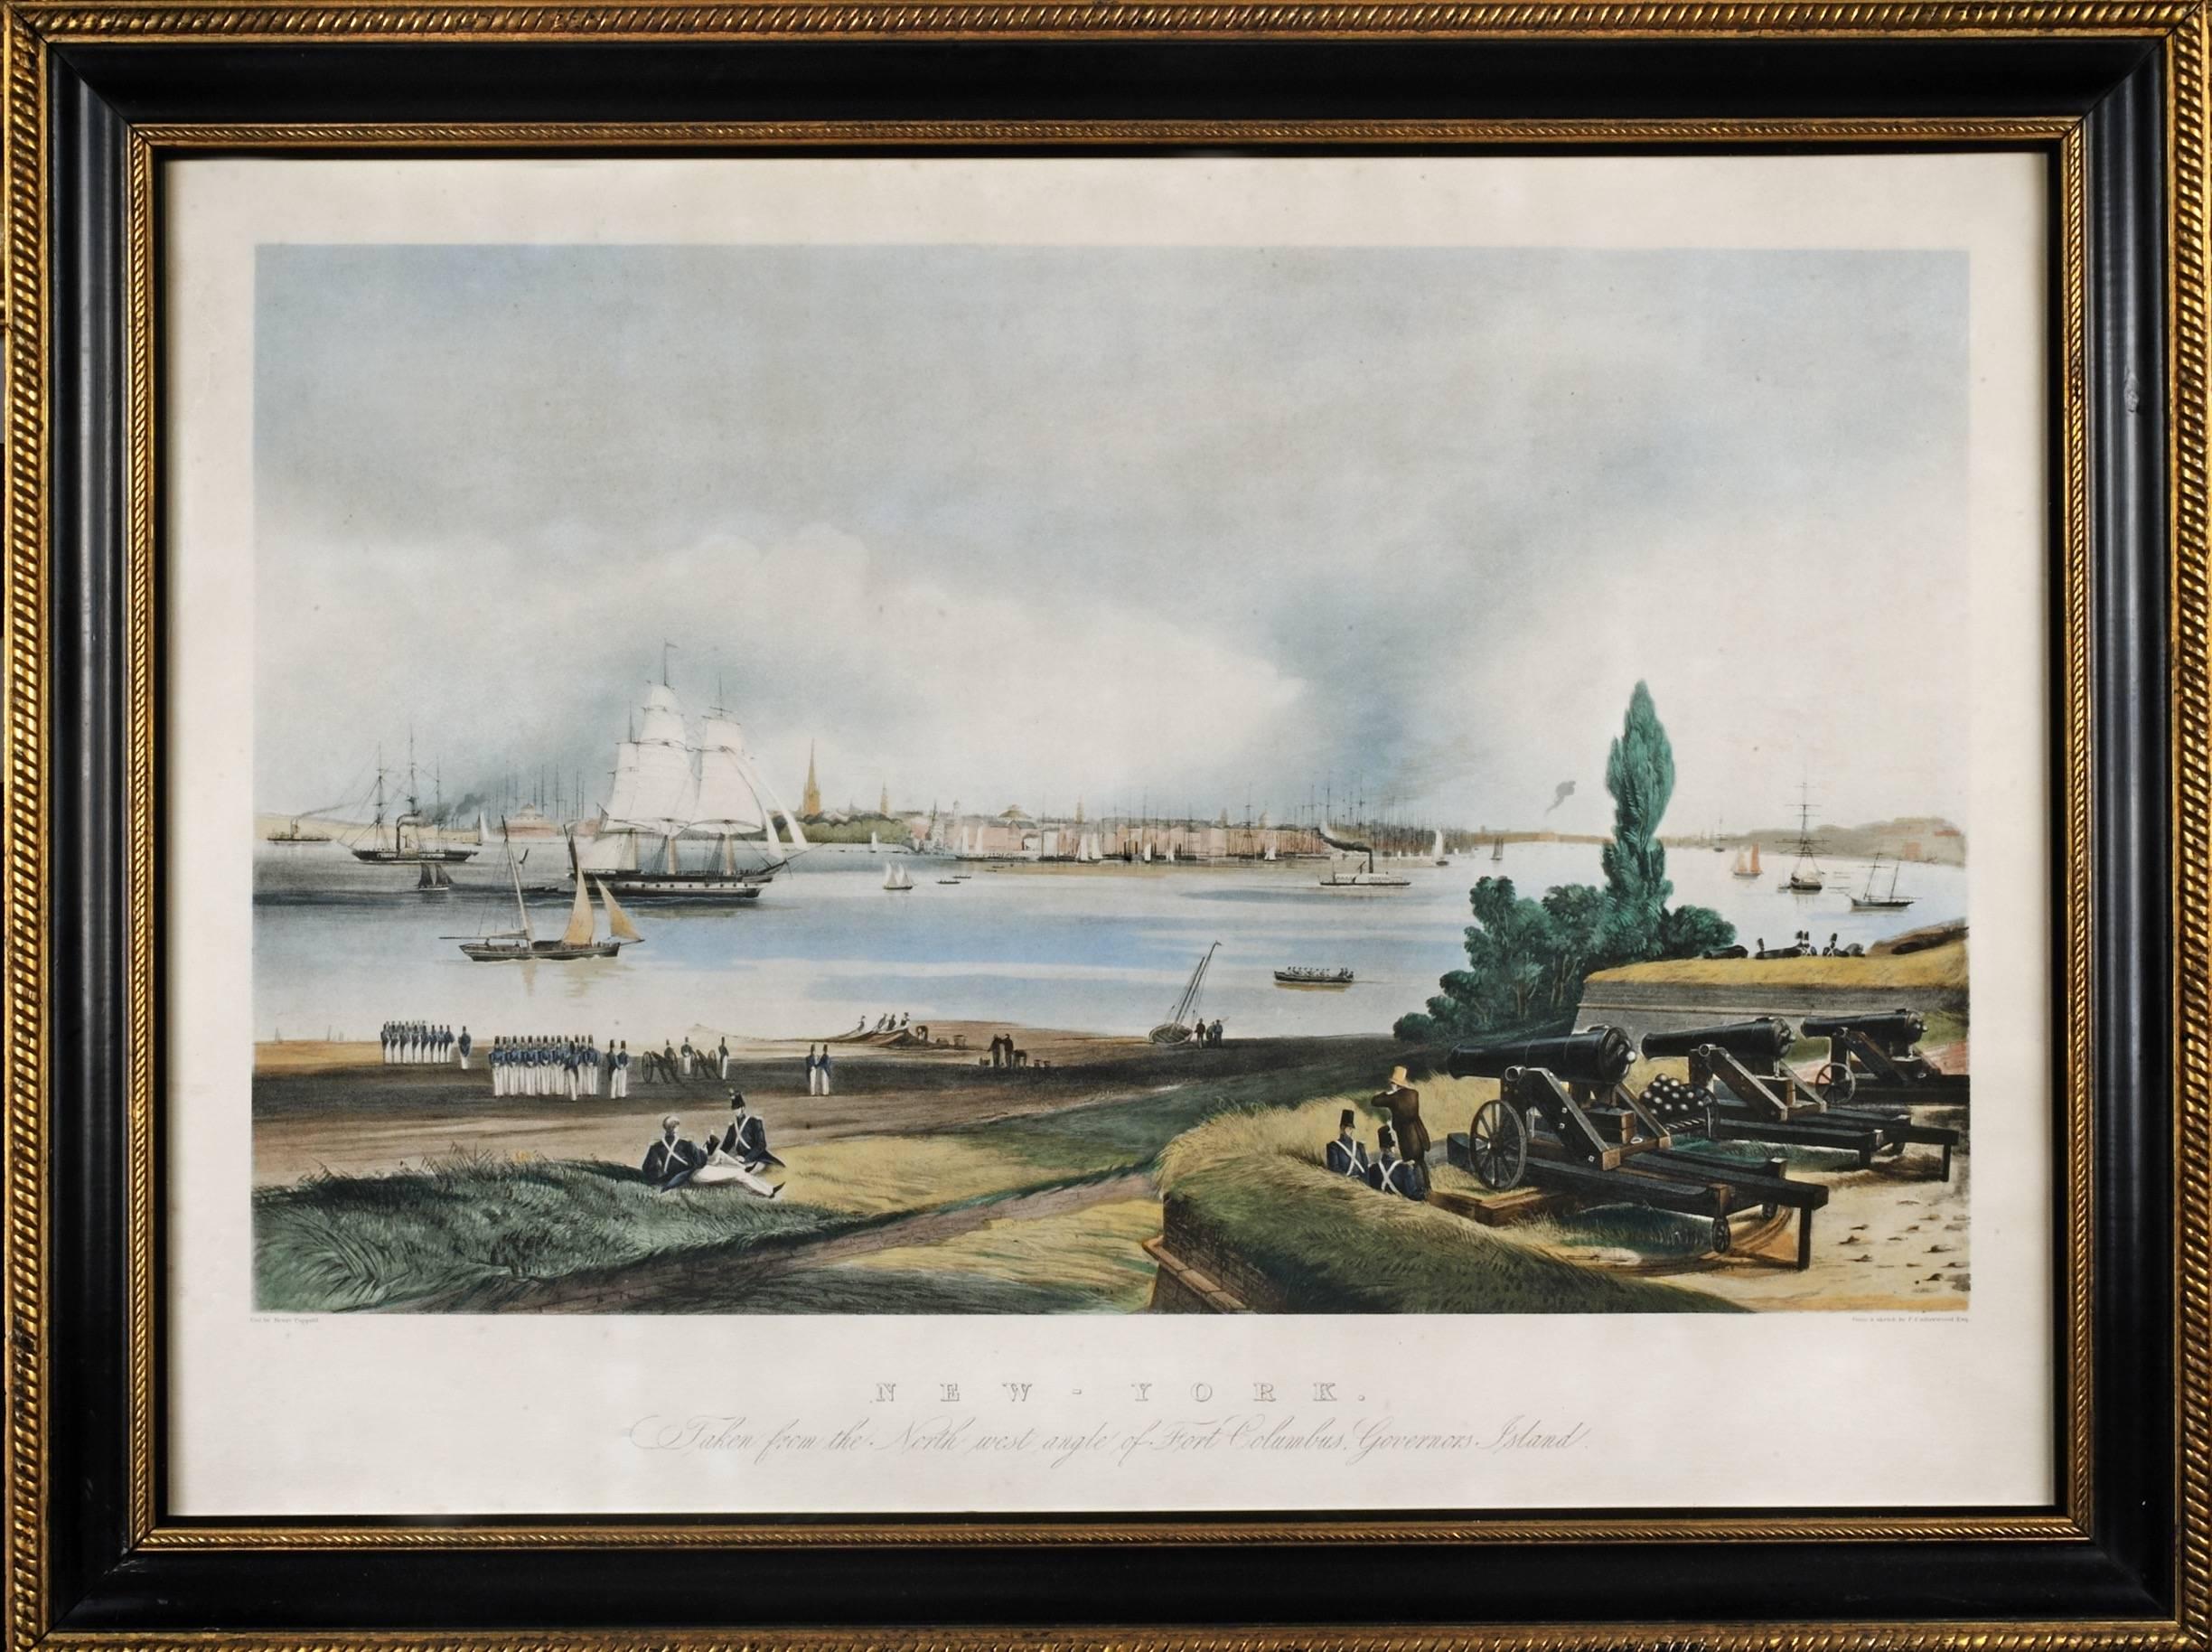 Frederick Catherwood Landscape Print - New York: Taken from Nort West Angle of Fort Columbus Governors Island